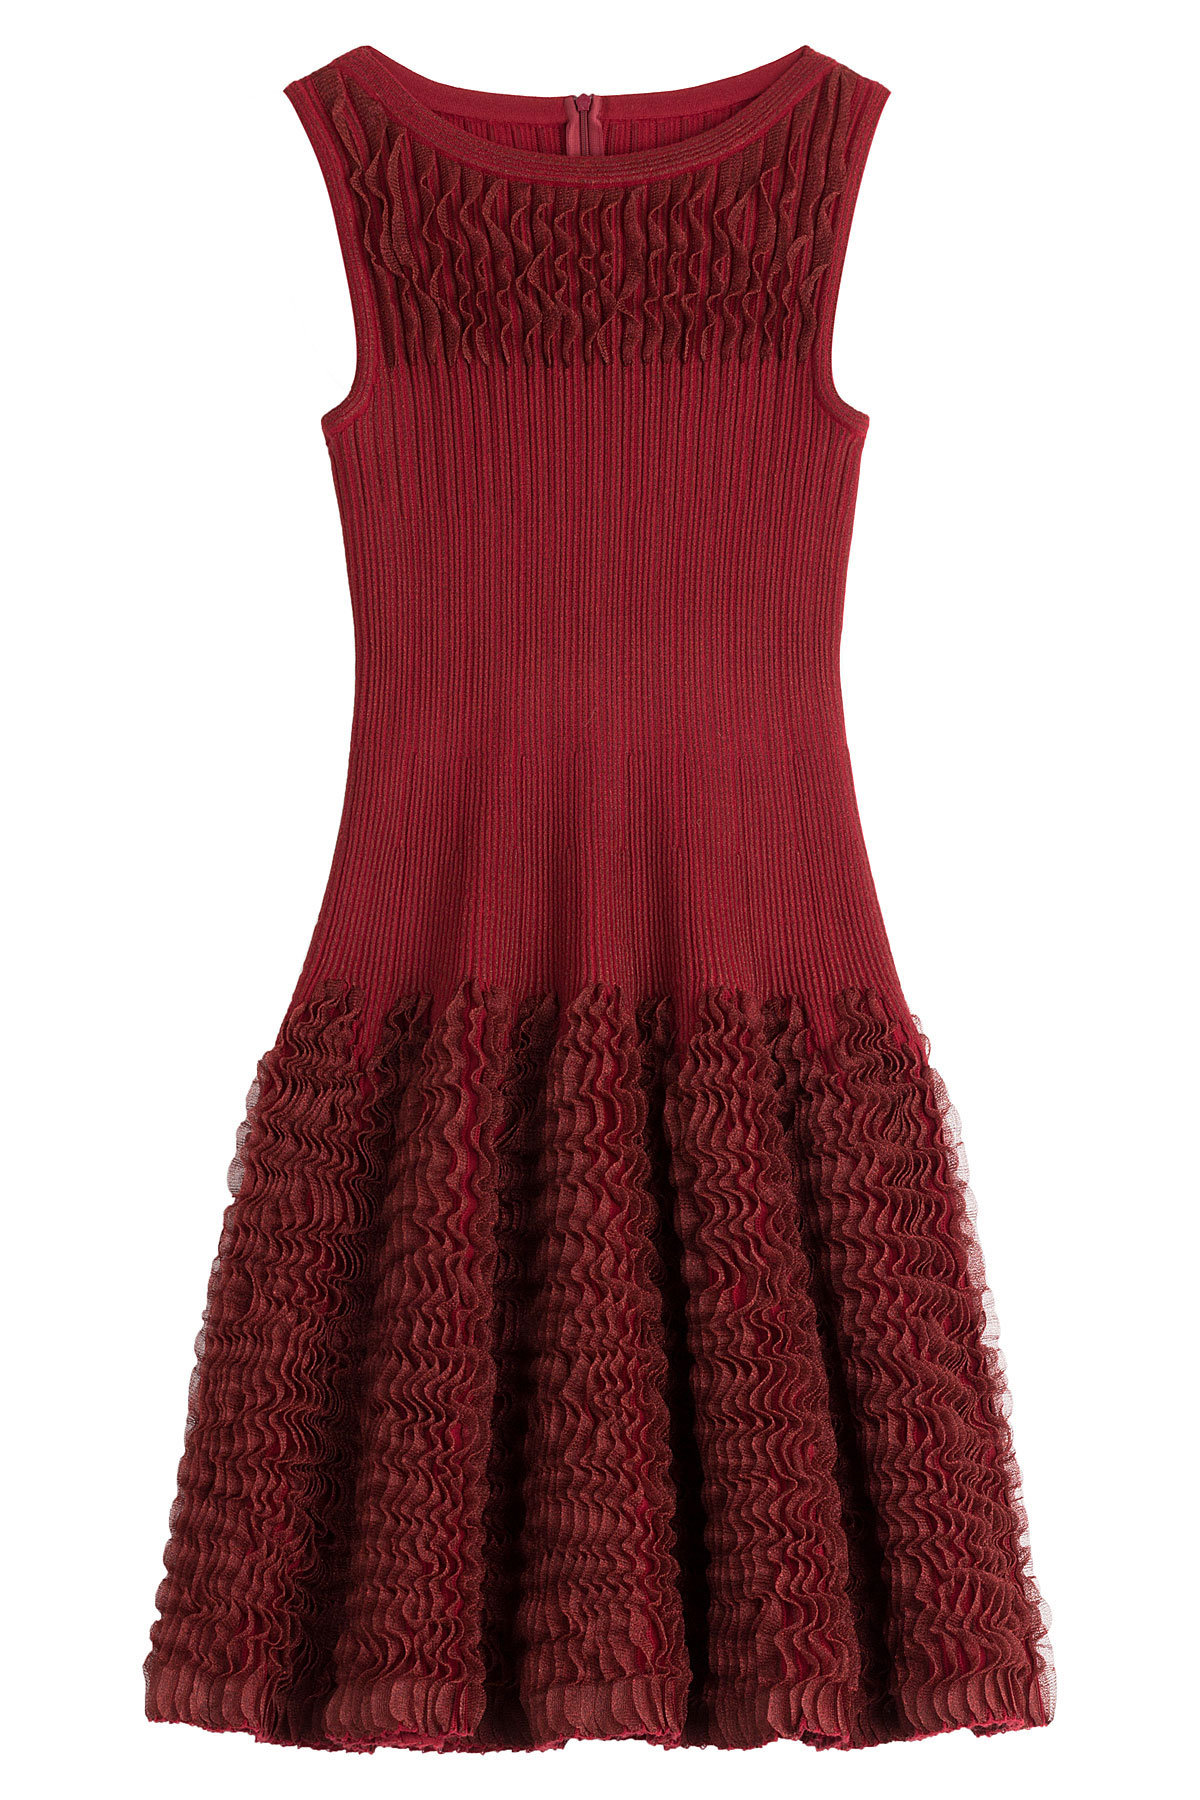 Ruffled Knit Dress with Wool by Alaia